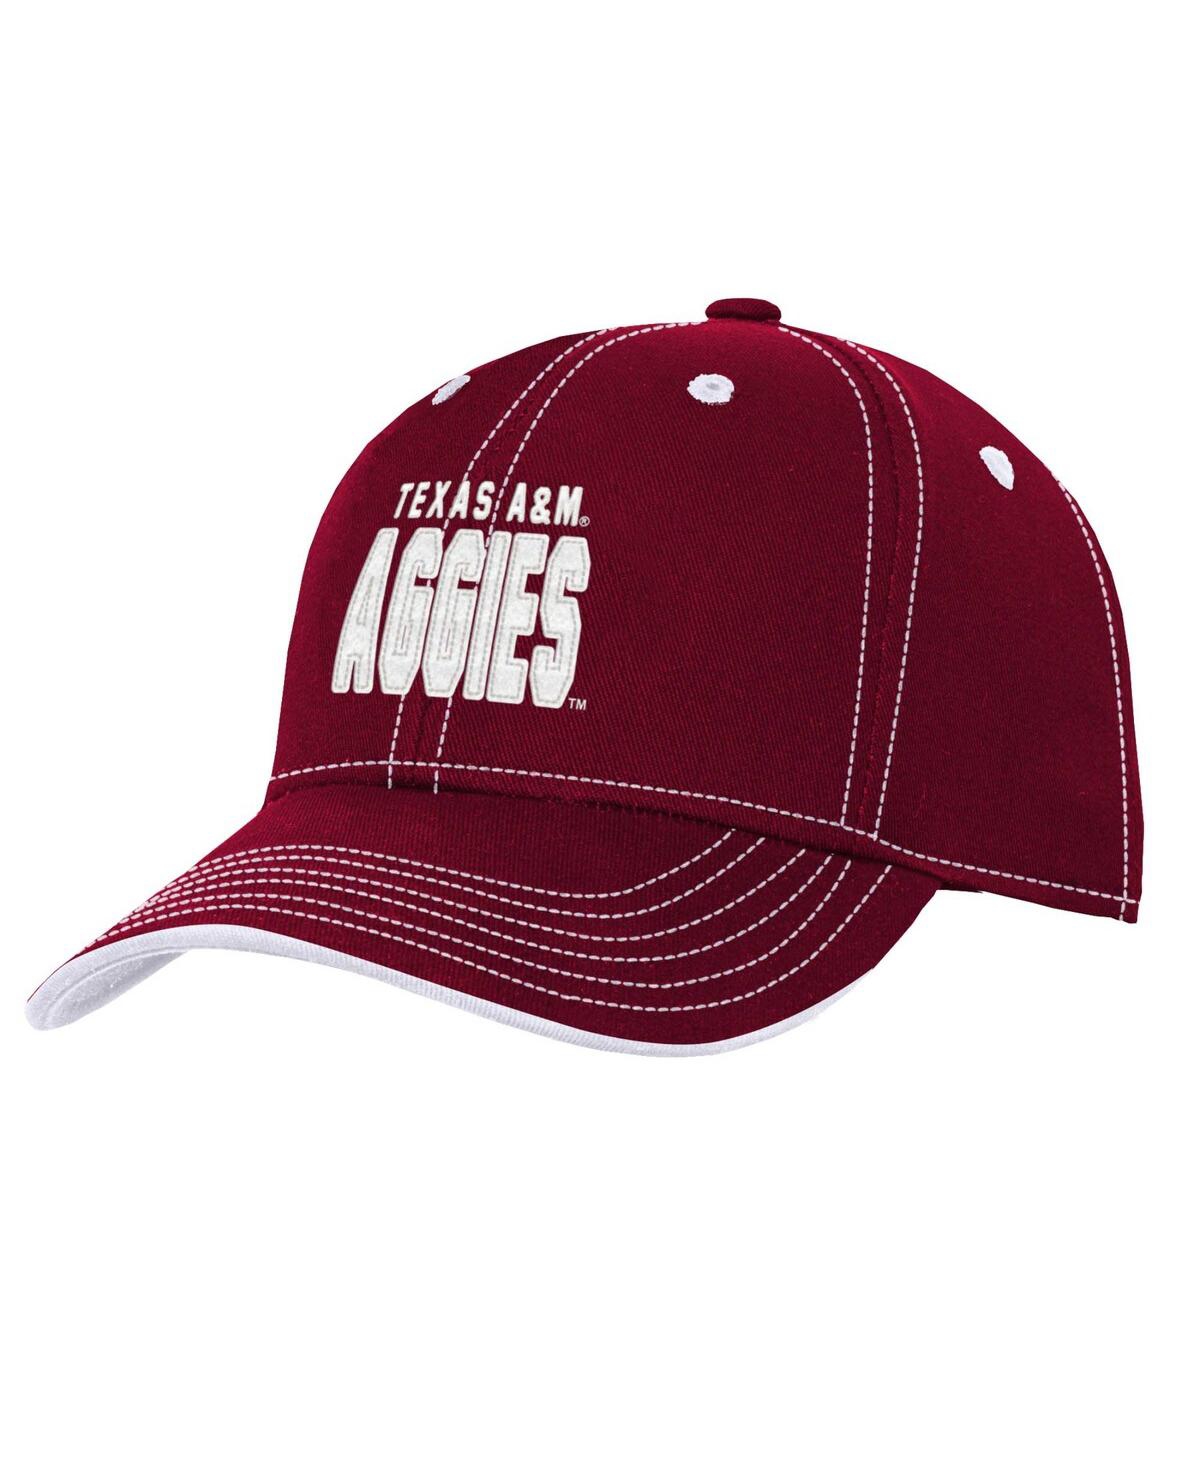 Shop Outerstuff Big Boys And Girls Maroon Texas A&m Aggies Old School Slouch Adjustable Hat